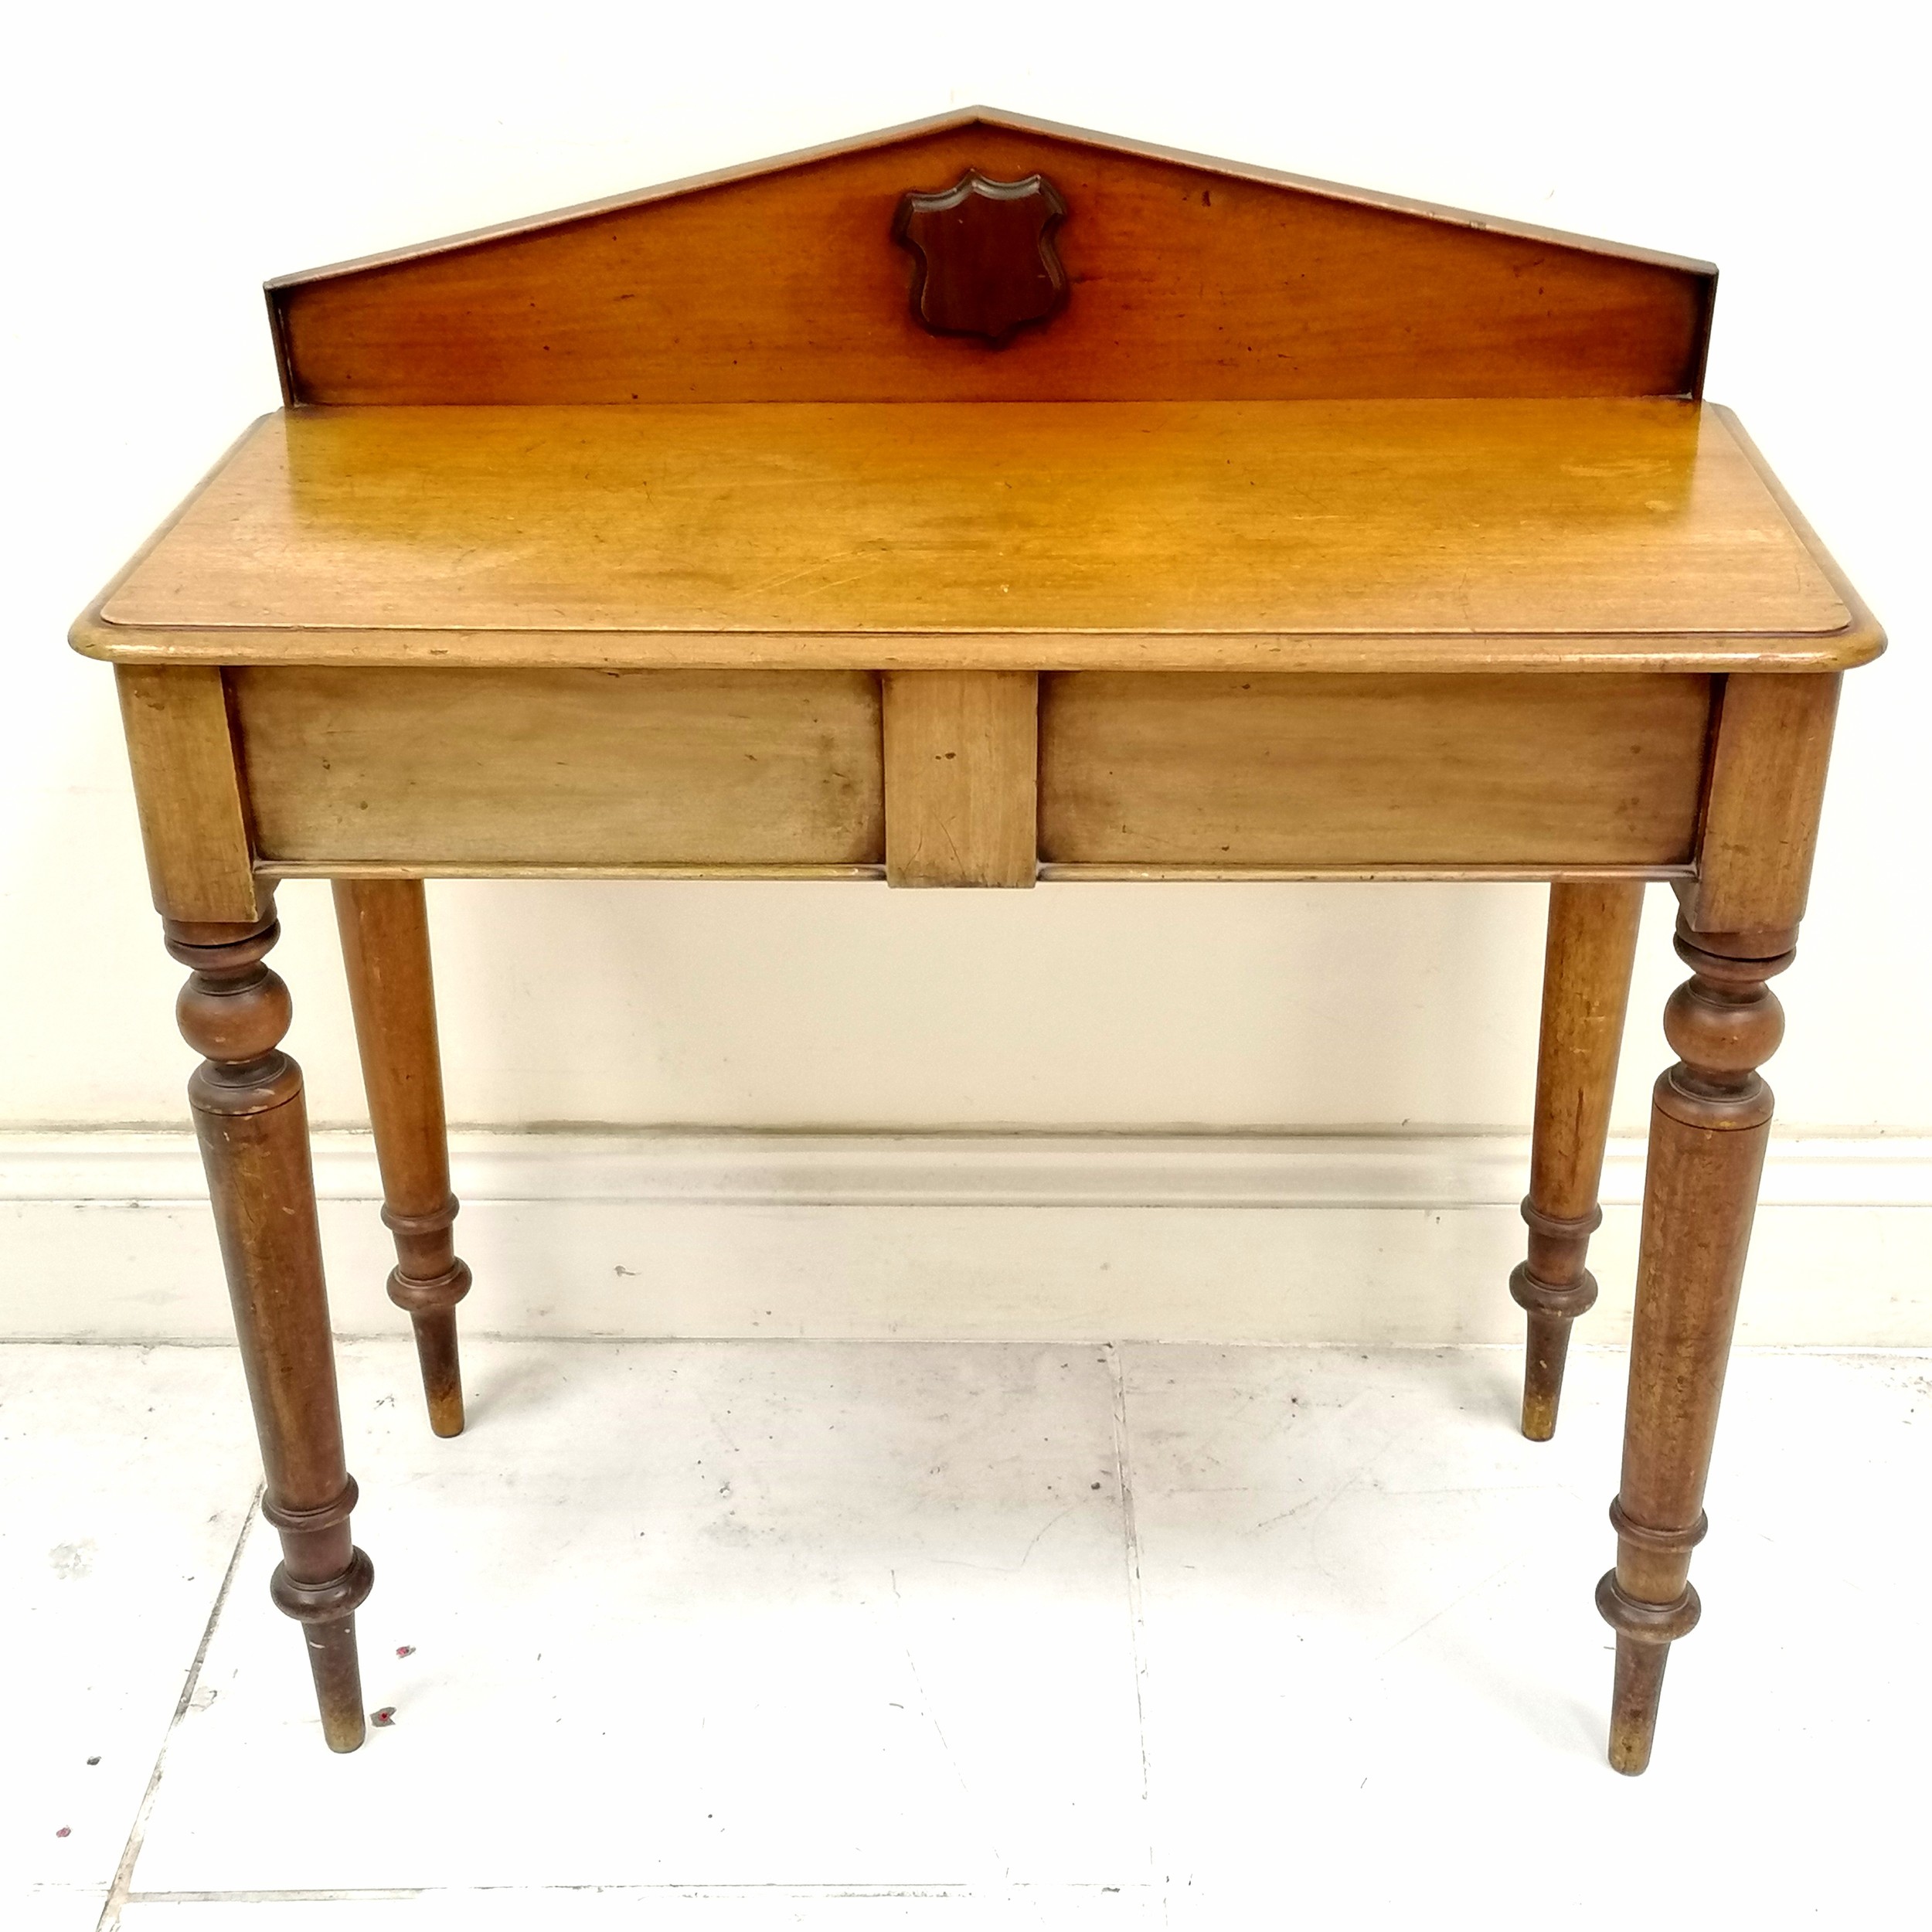 Antique mahogany hall table with decorated with carved shield, on turned legs, in used condition, 90